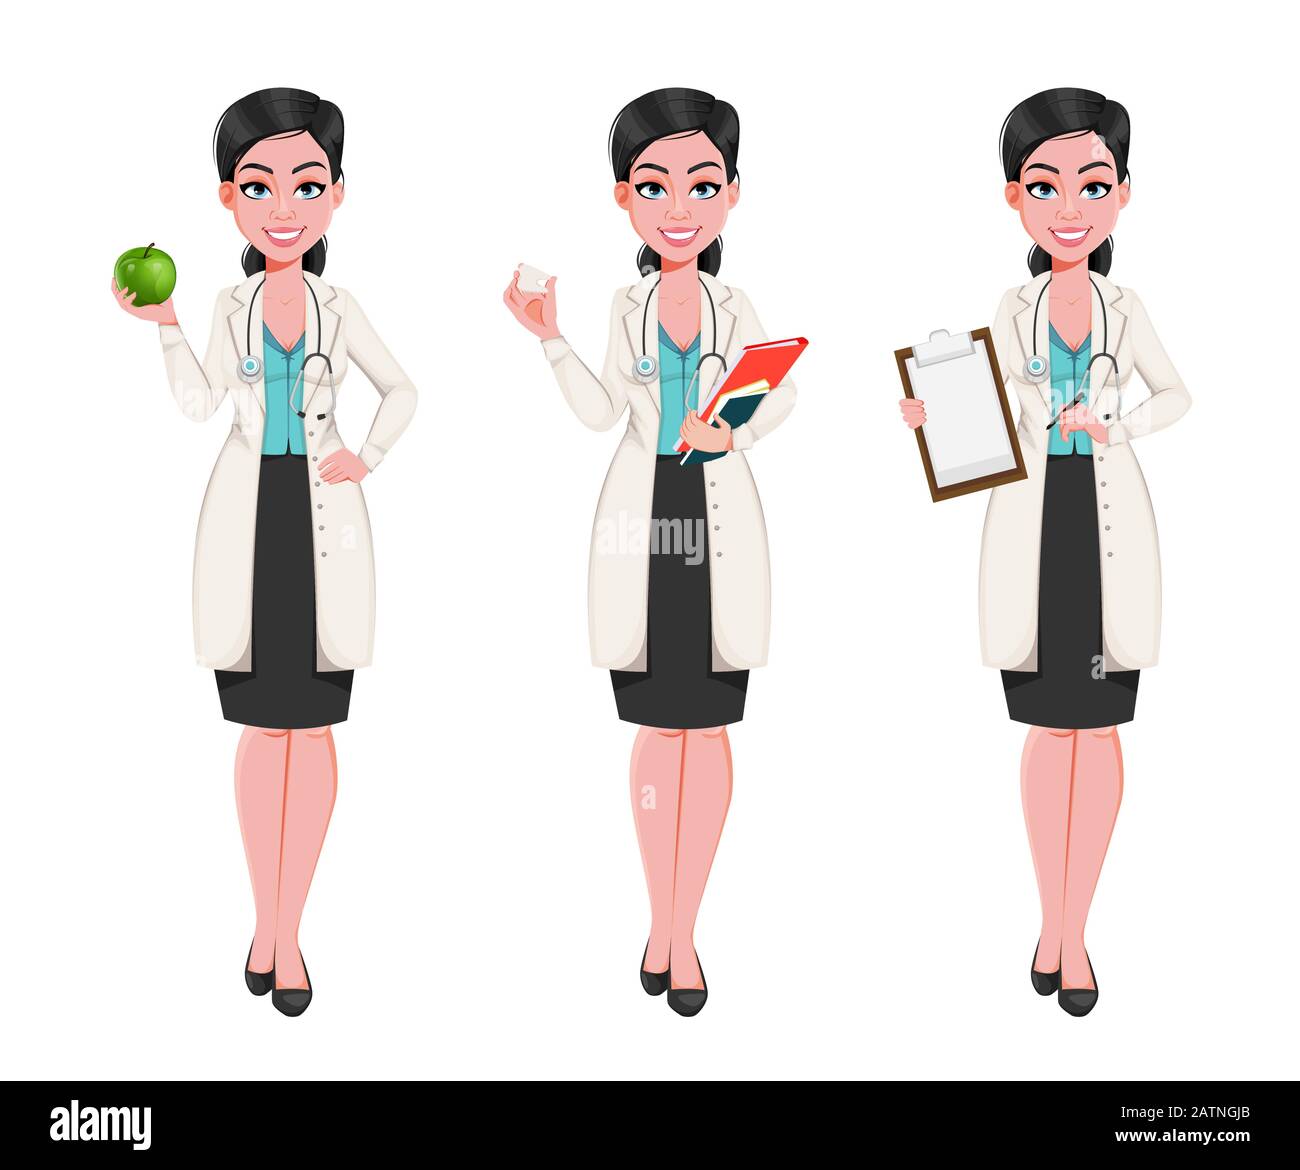 Medical doctor woman, set of three poses. Attractive confident female doctor cartoon character holding apple, holding tooth model and holding clipboar Stock Vector